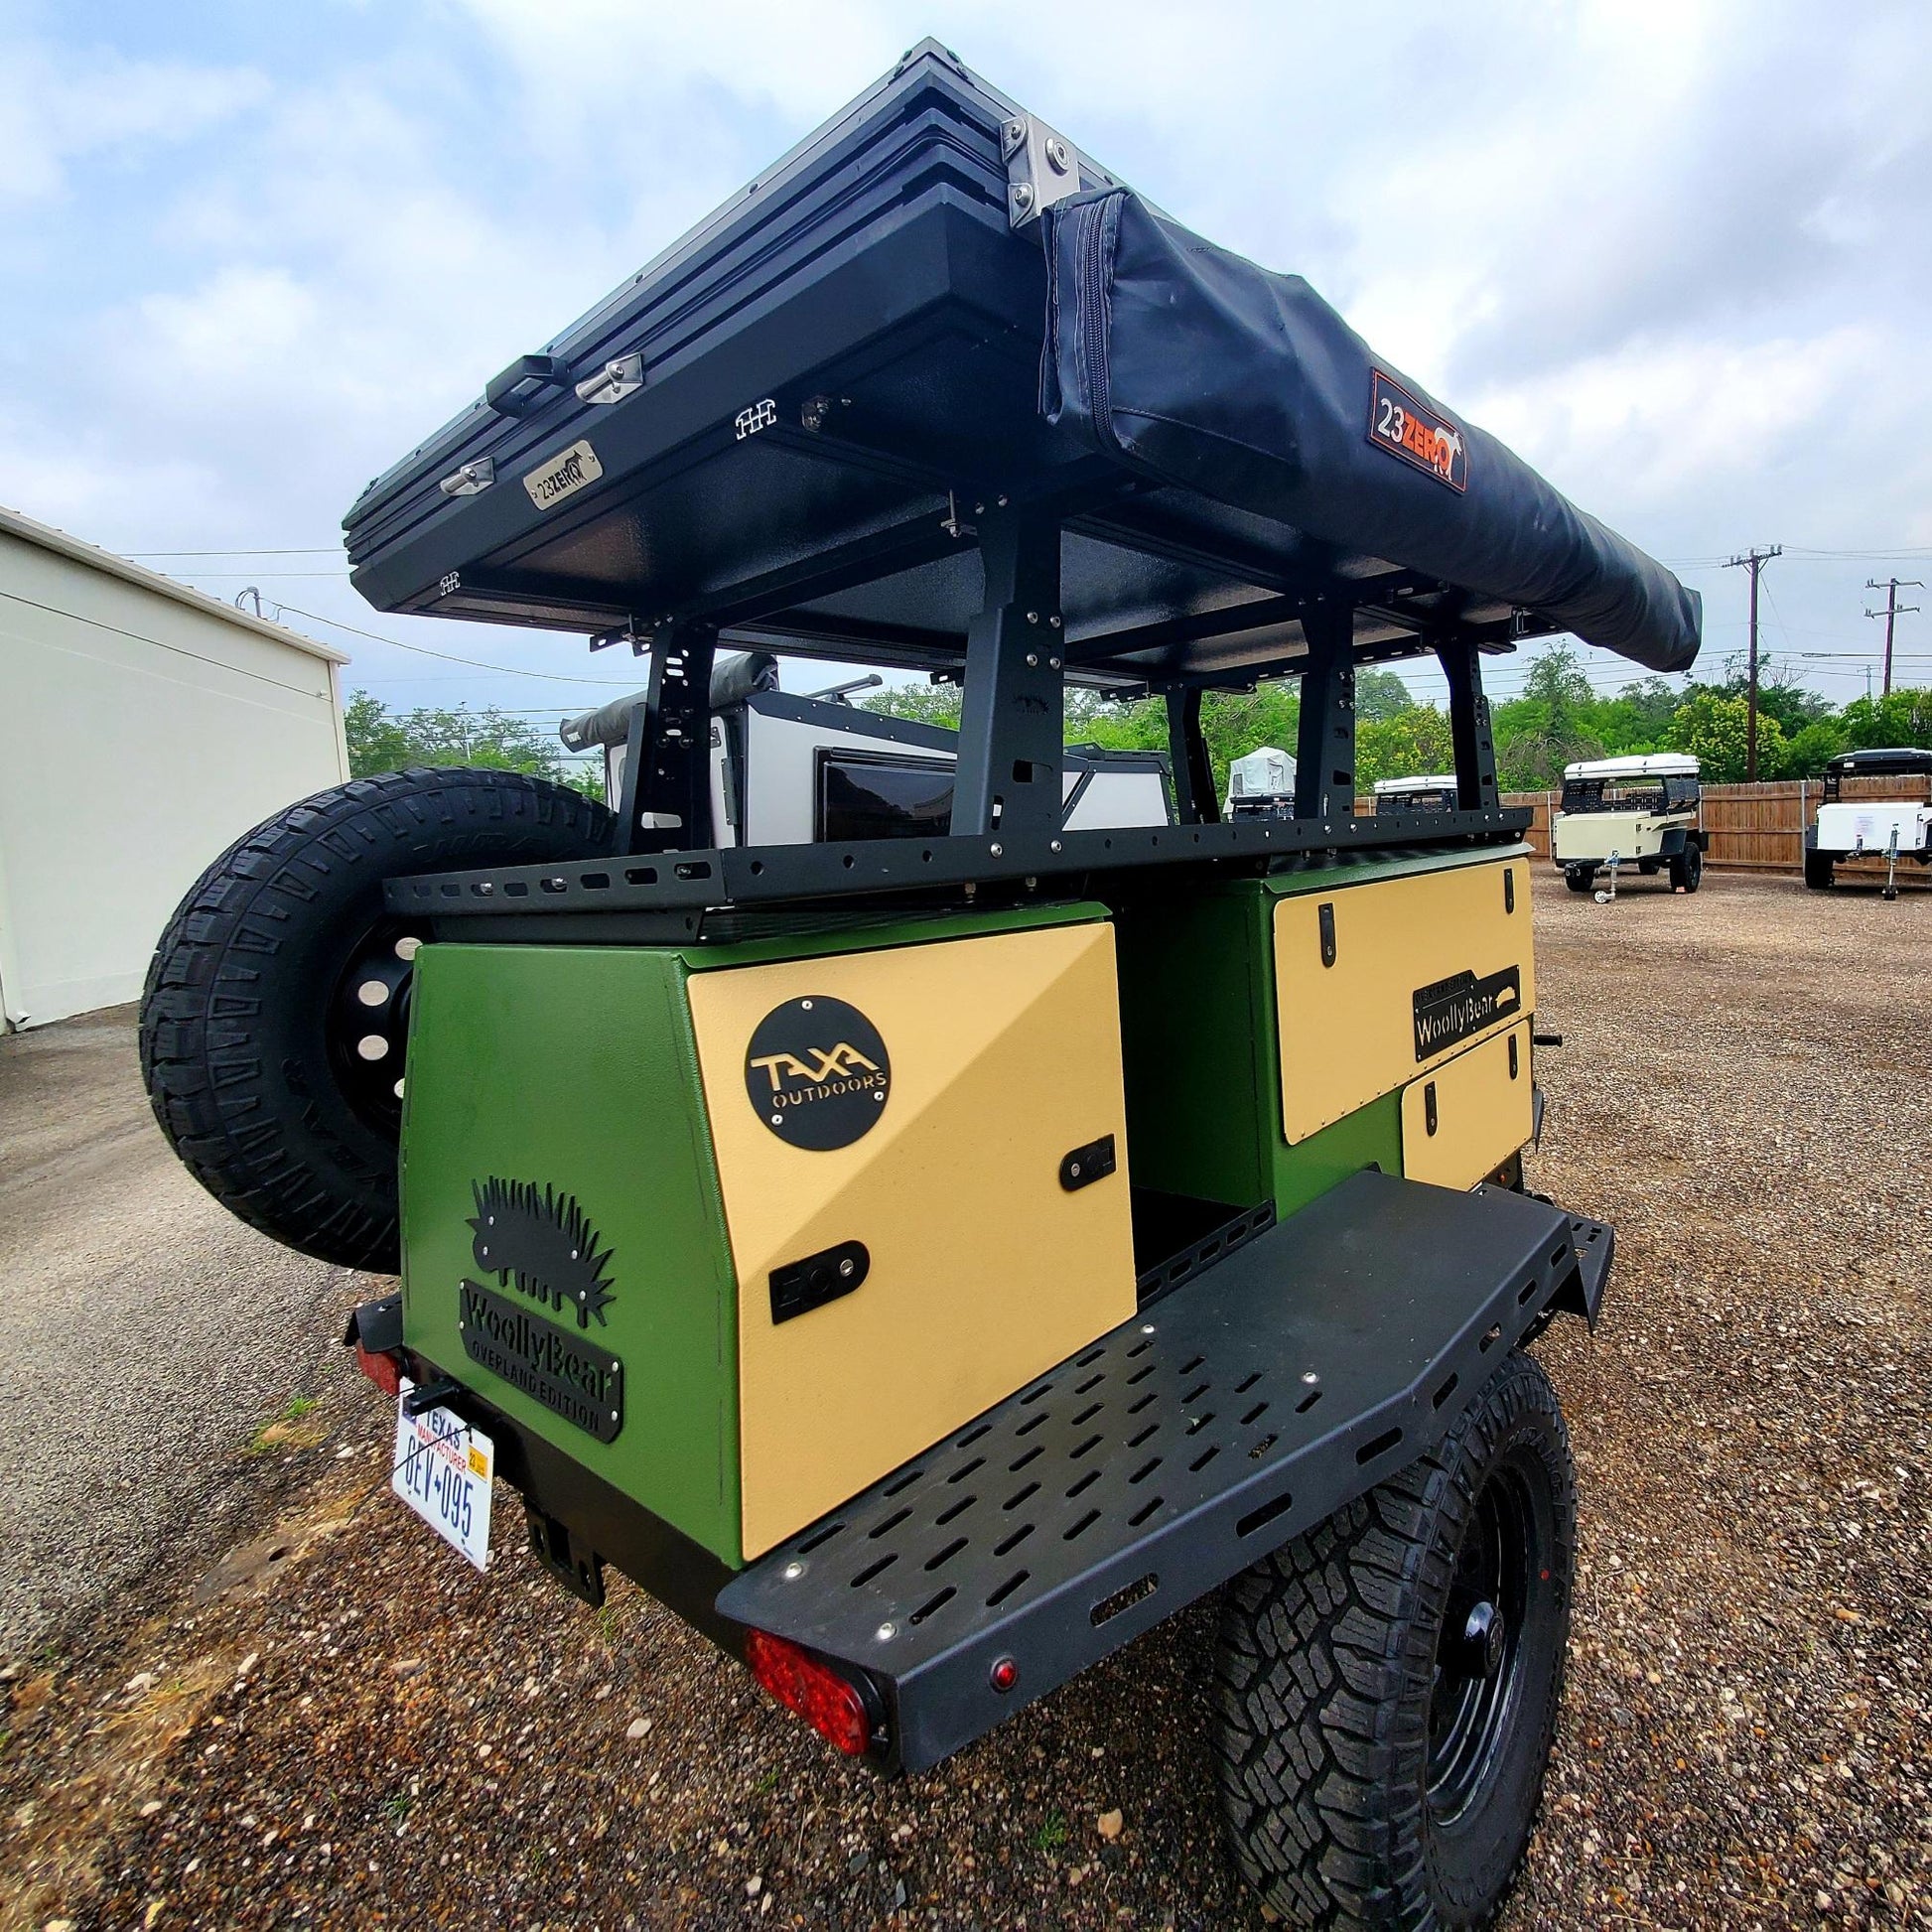 taxa outdoors woolly bear overland edition trailer for sale in san antonio texas at hawkes outdoors 2102512882